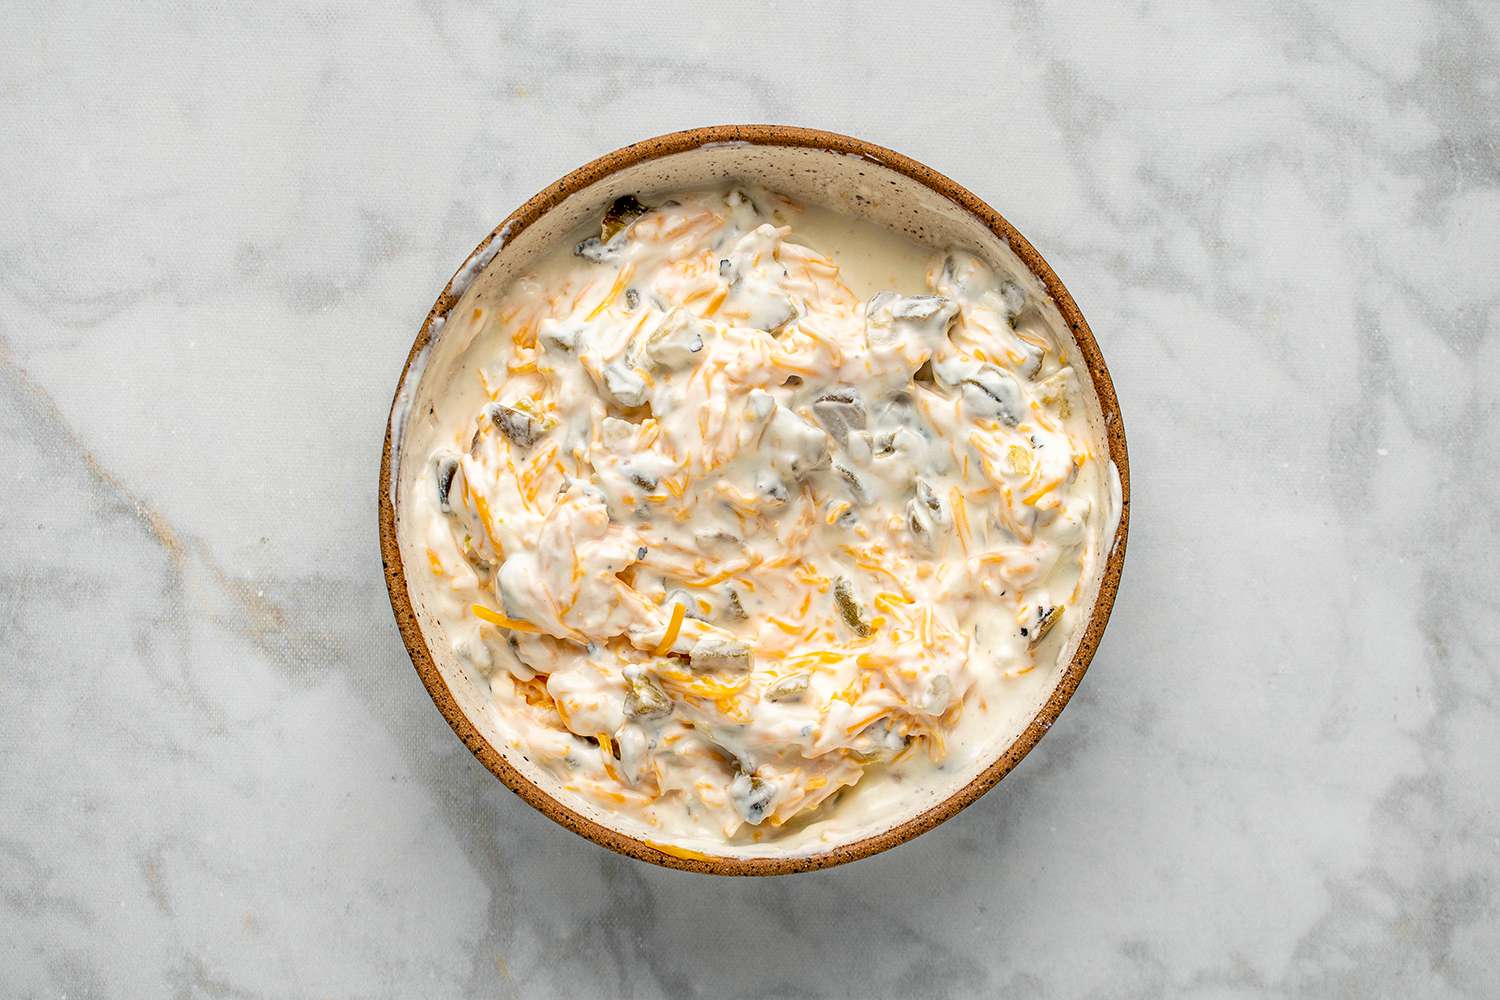 Sour cream, cheddar, and jalapeños stirred together in a bowl 